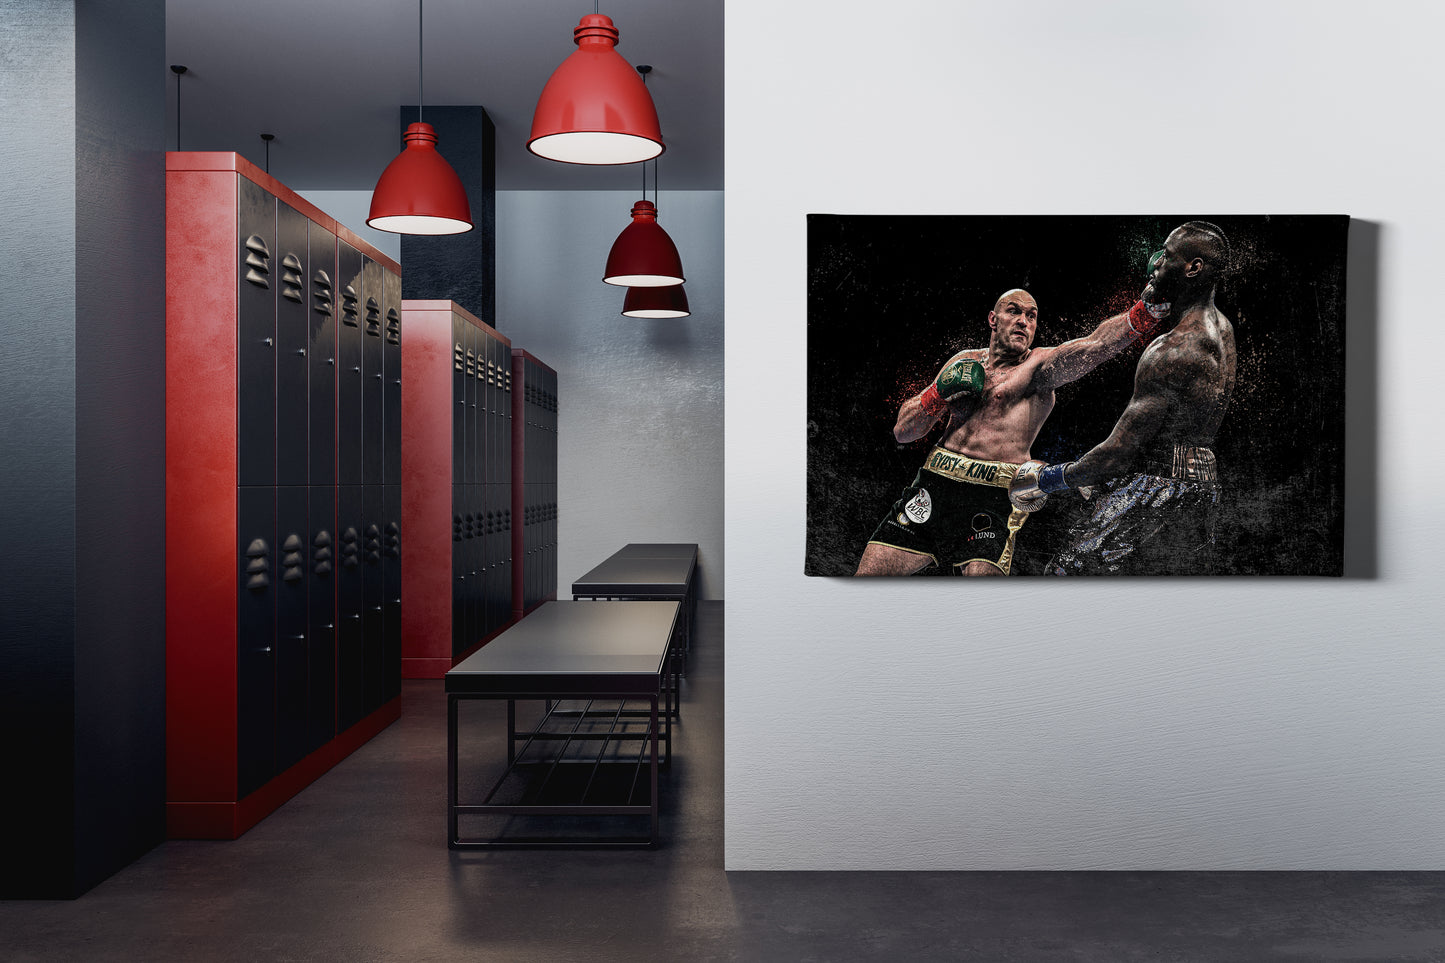 Tyson Fury Deontay Wilder Poster Boxing Hand Made Posters Canvas Print Wall Art Home Man Cave Gift Decor